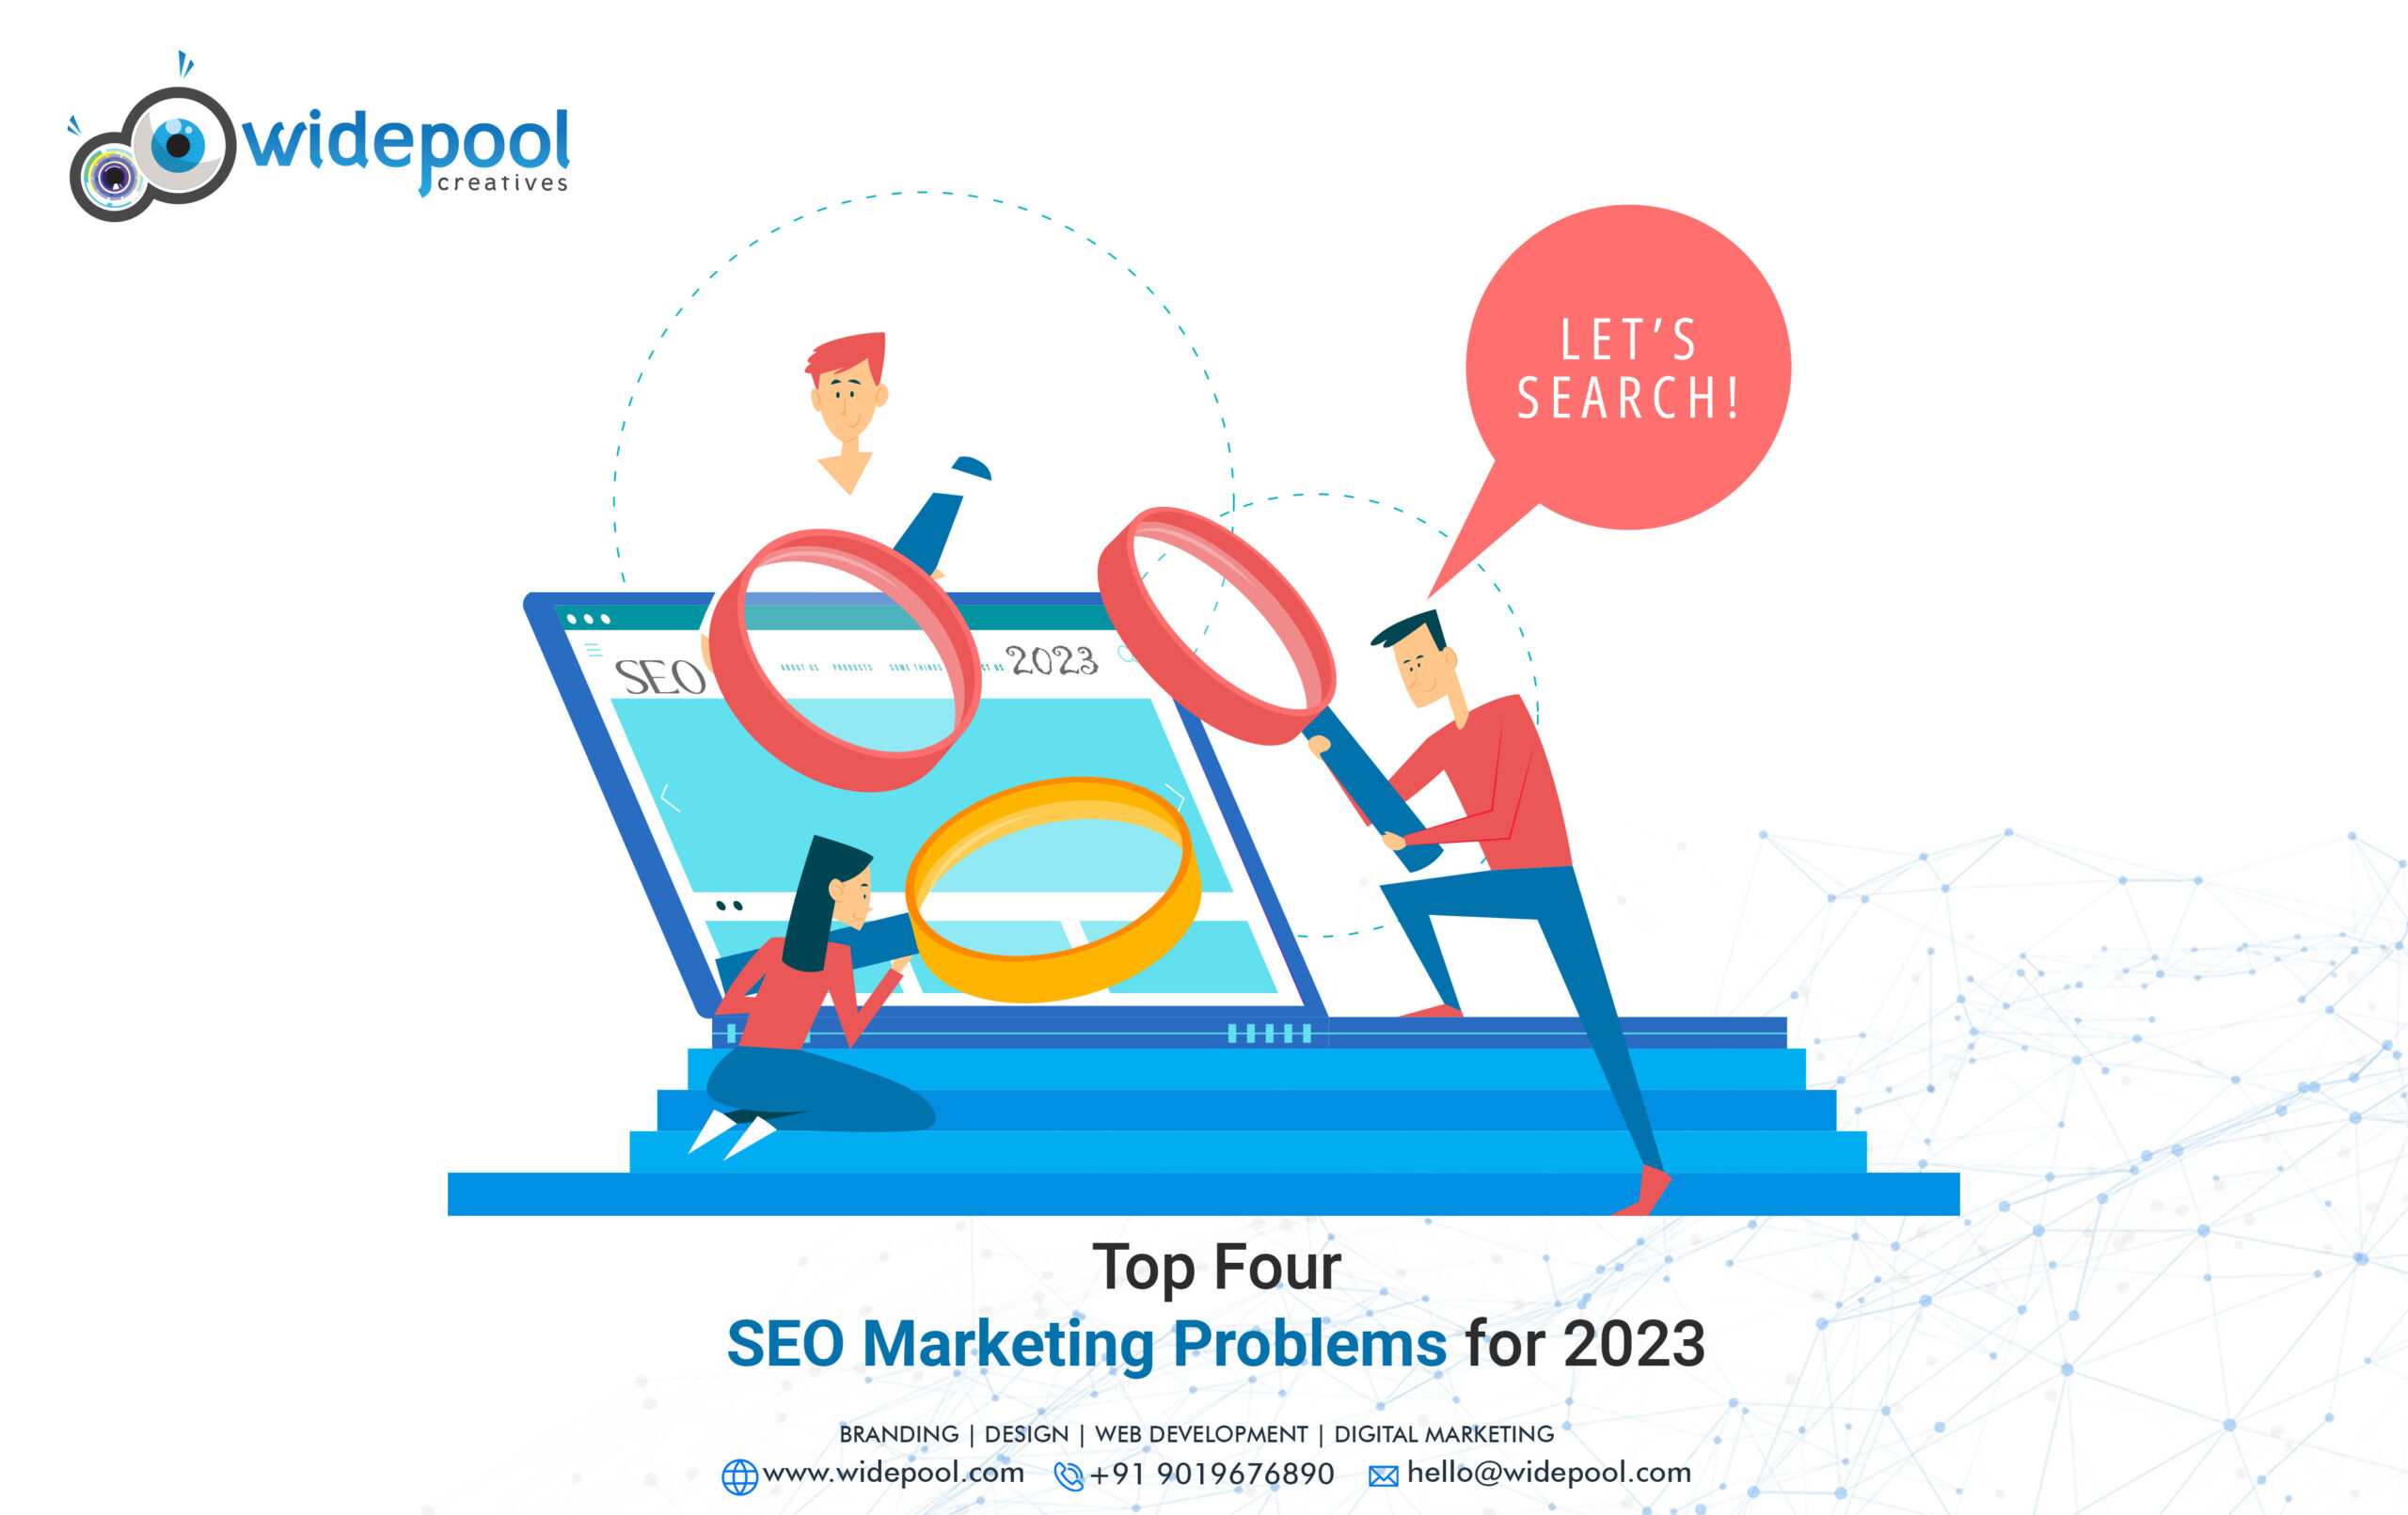 Top Four SEO Marketing Problems for 2023